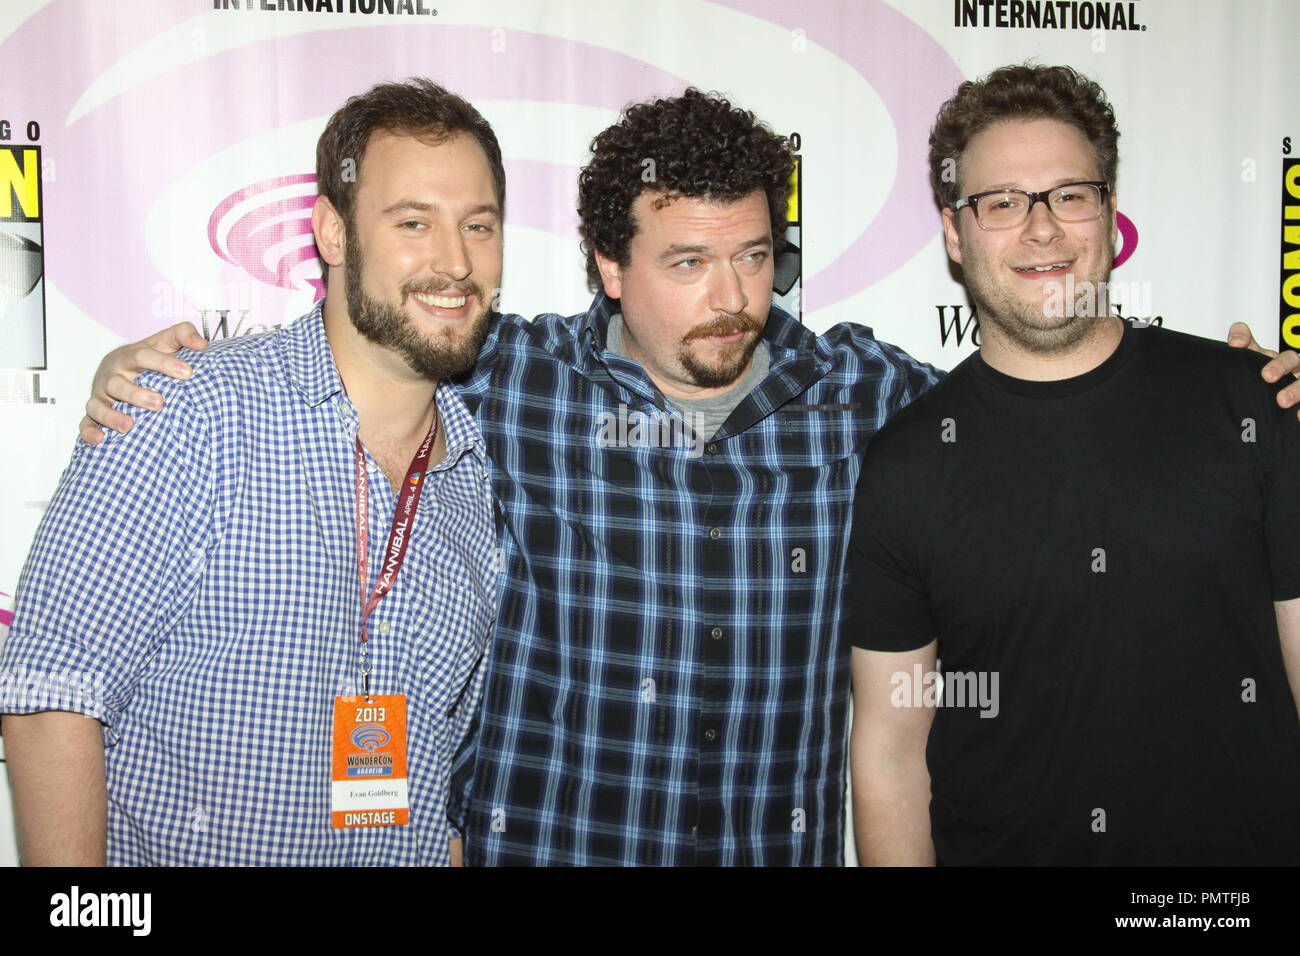 Director Evan Goldberg, Danny McBride and Seth Rogen at Day 2 of WonderCon Anaheim. This Is The End Press Line Arrivals held at the Anaheim Convention Center in Anaheim, CA, March 30, 2013. Photo by: Richard Chavez / PictureLux  File Reference # 31908 029RAC  For Editorial Use Only -  All Rights Reserved Stock Photo